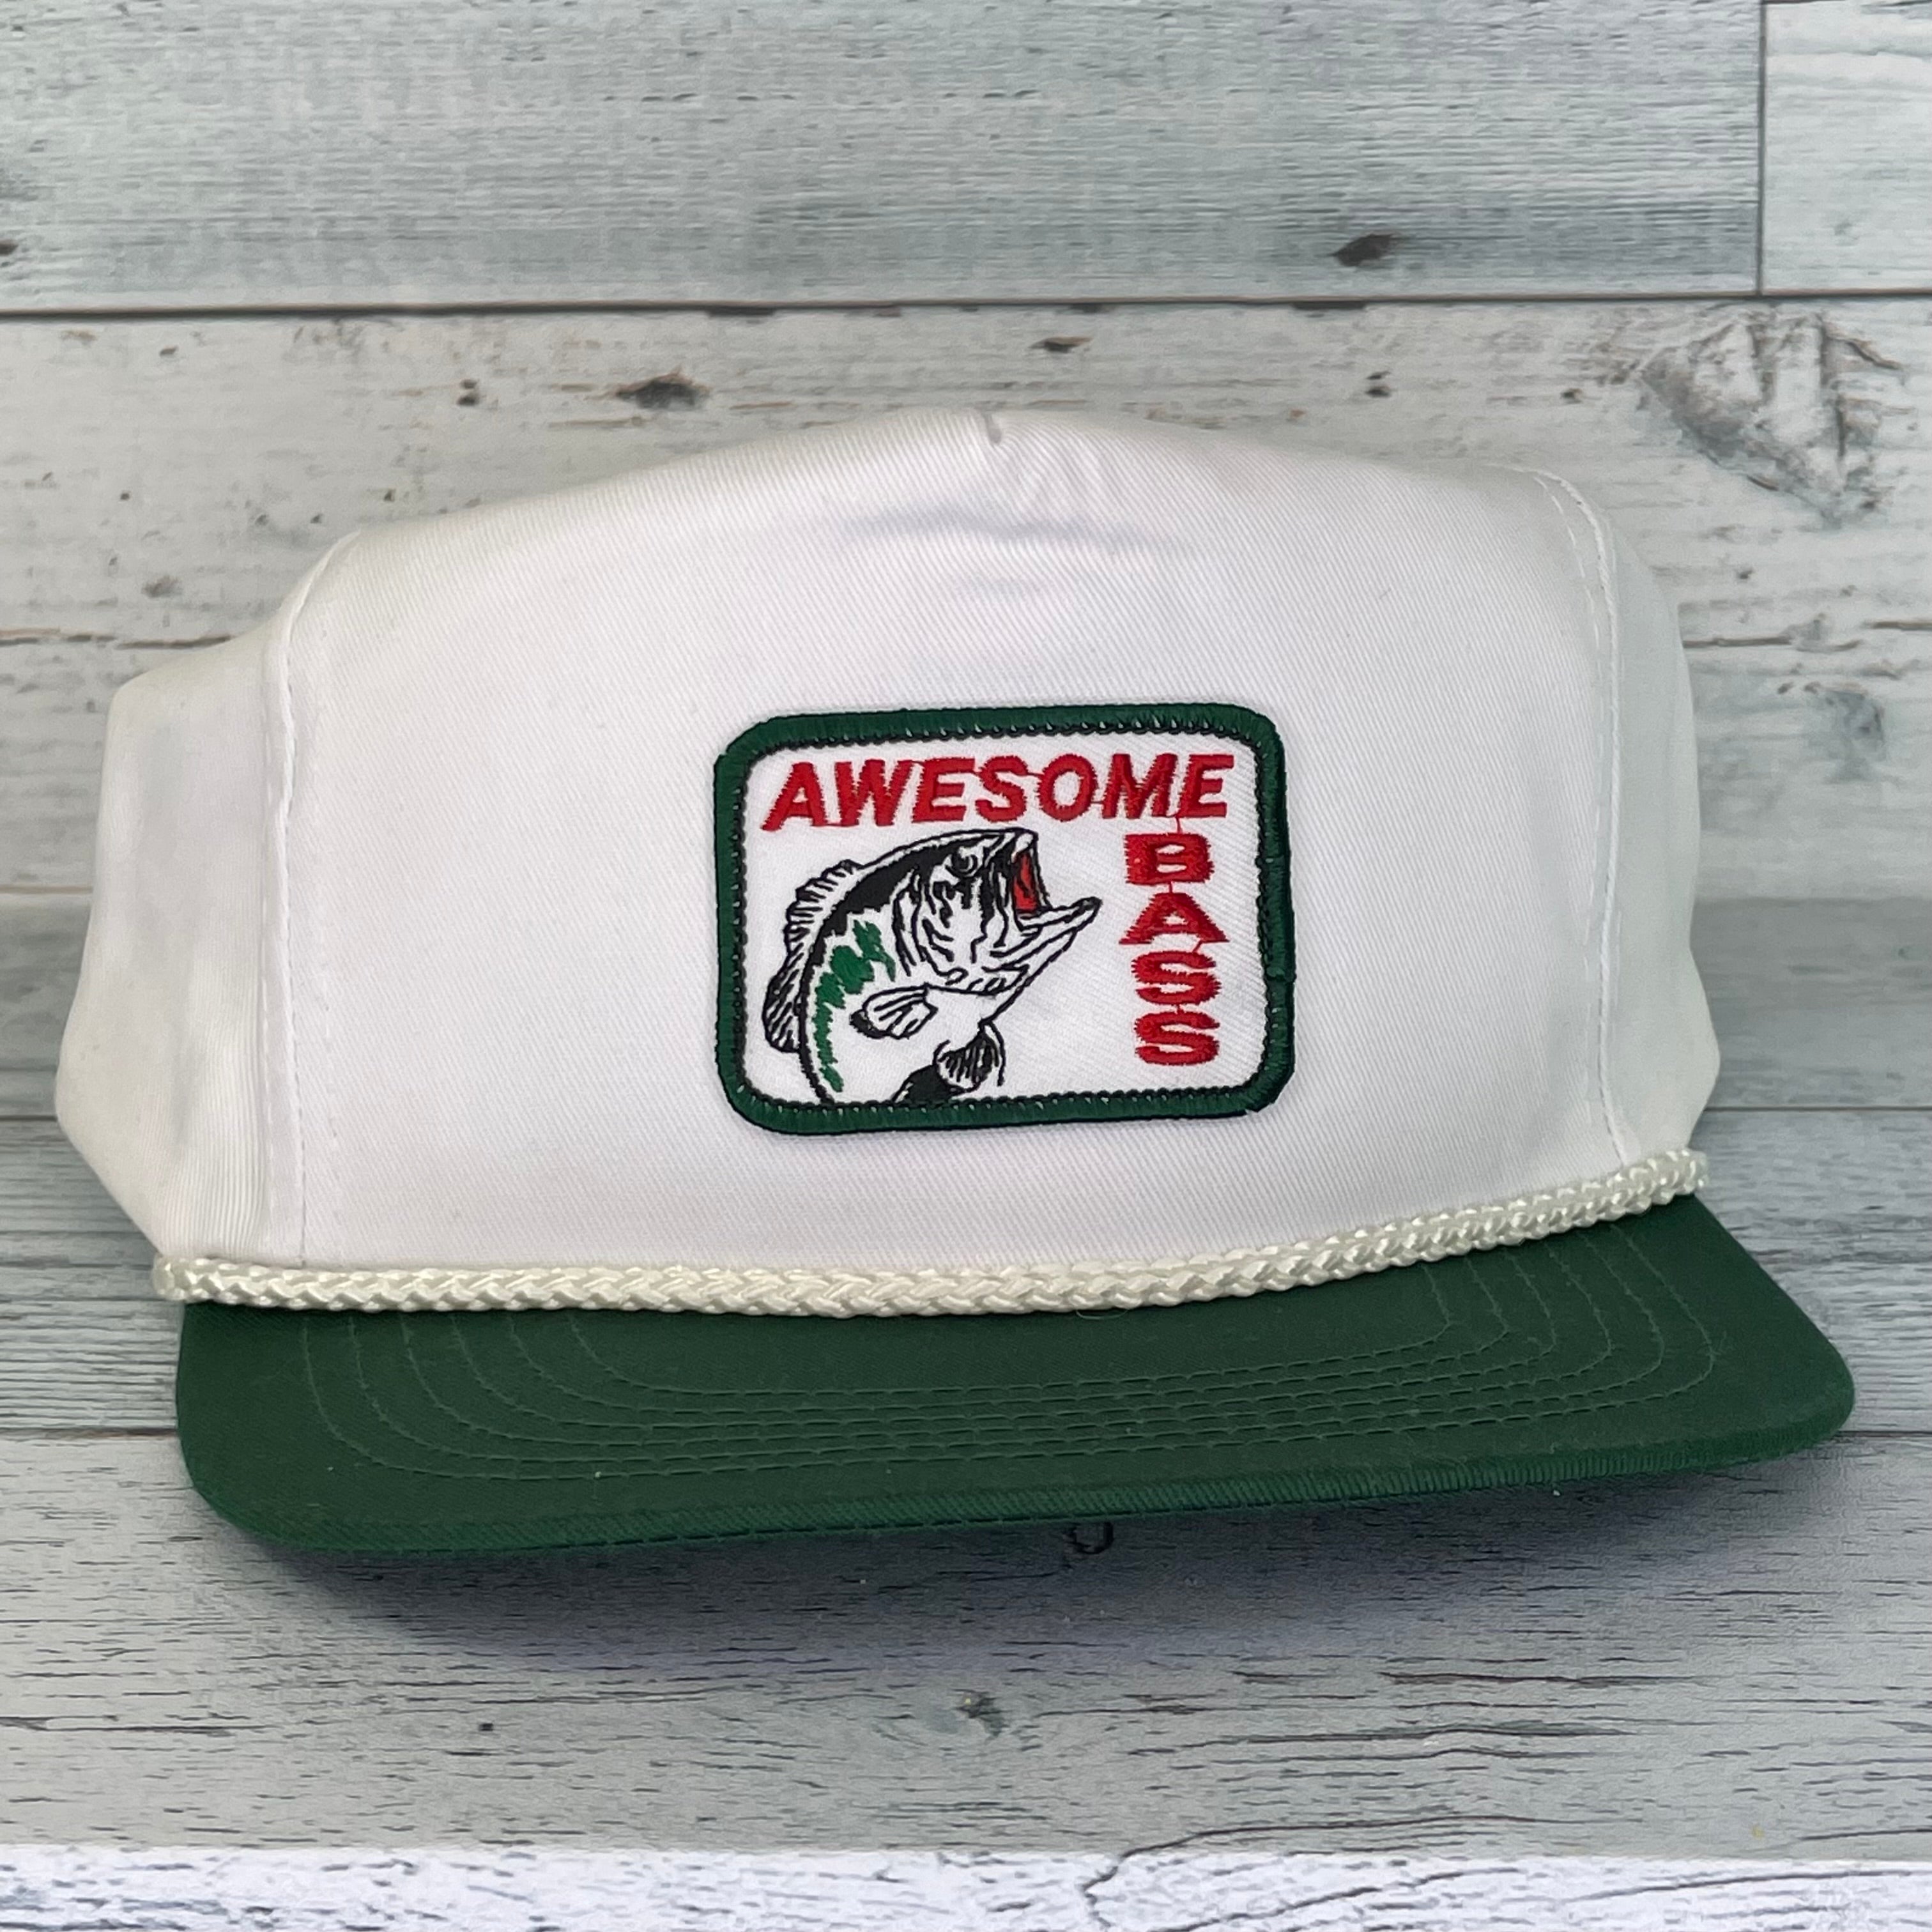 Personalized Bass Fishing Cap with custom Name, Fish Scales Green